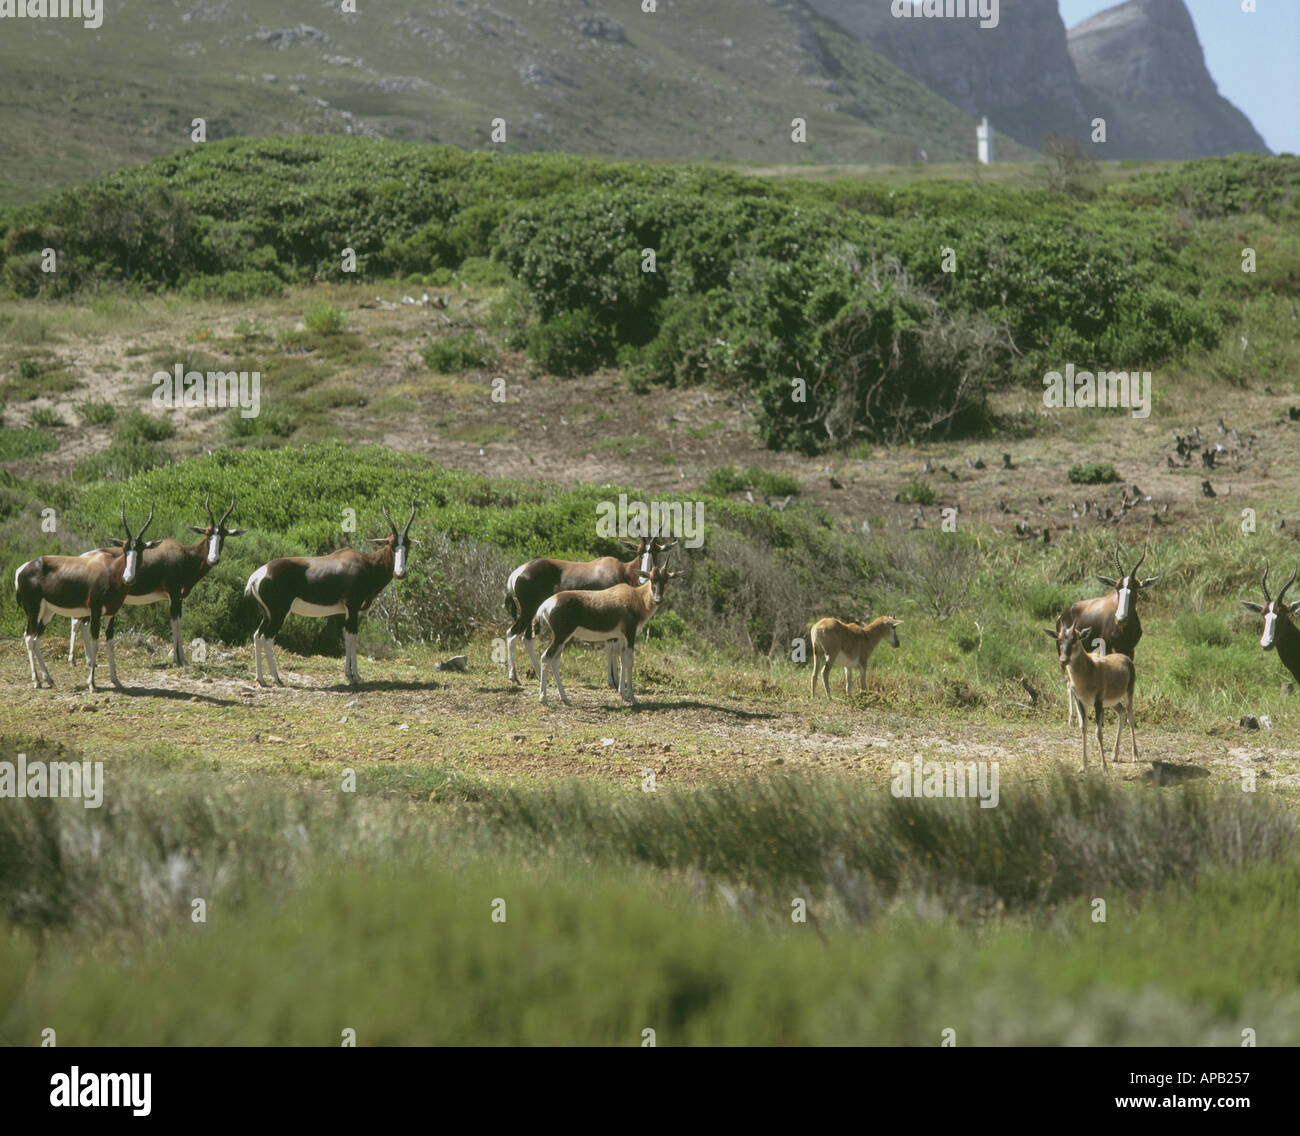 South Africa Cape province Bontebok in Cape of good hope nature reserve Stock Photo